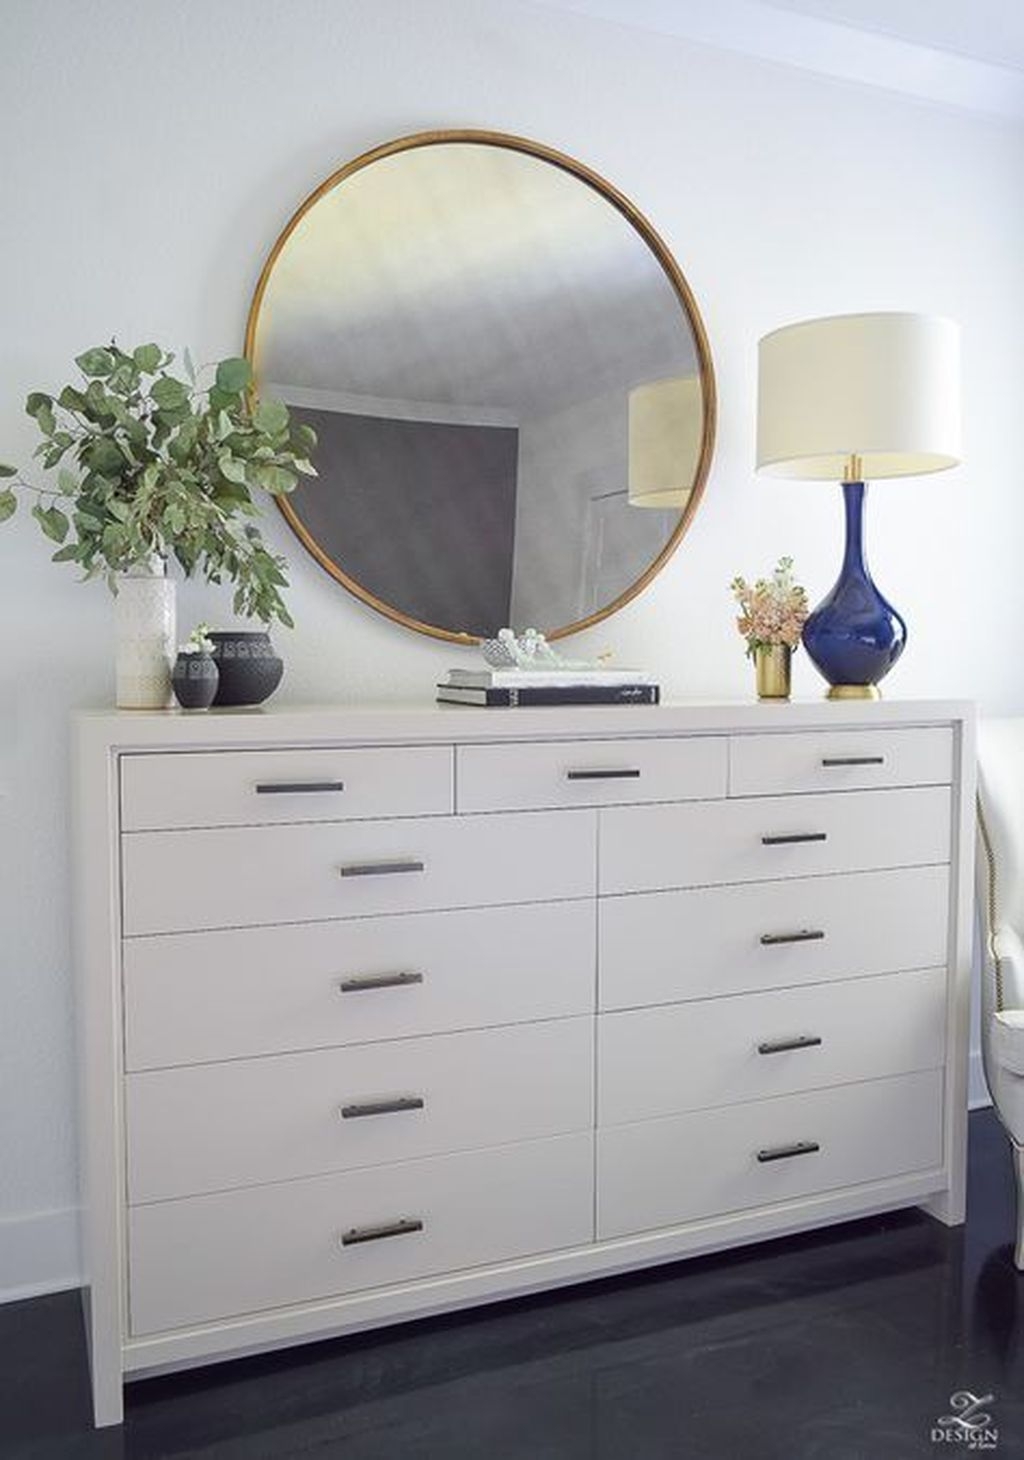 Stylish Bedroom Dressers Ideas With Mirrors That You Need To Try 07